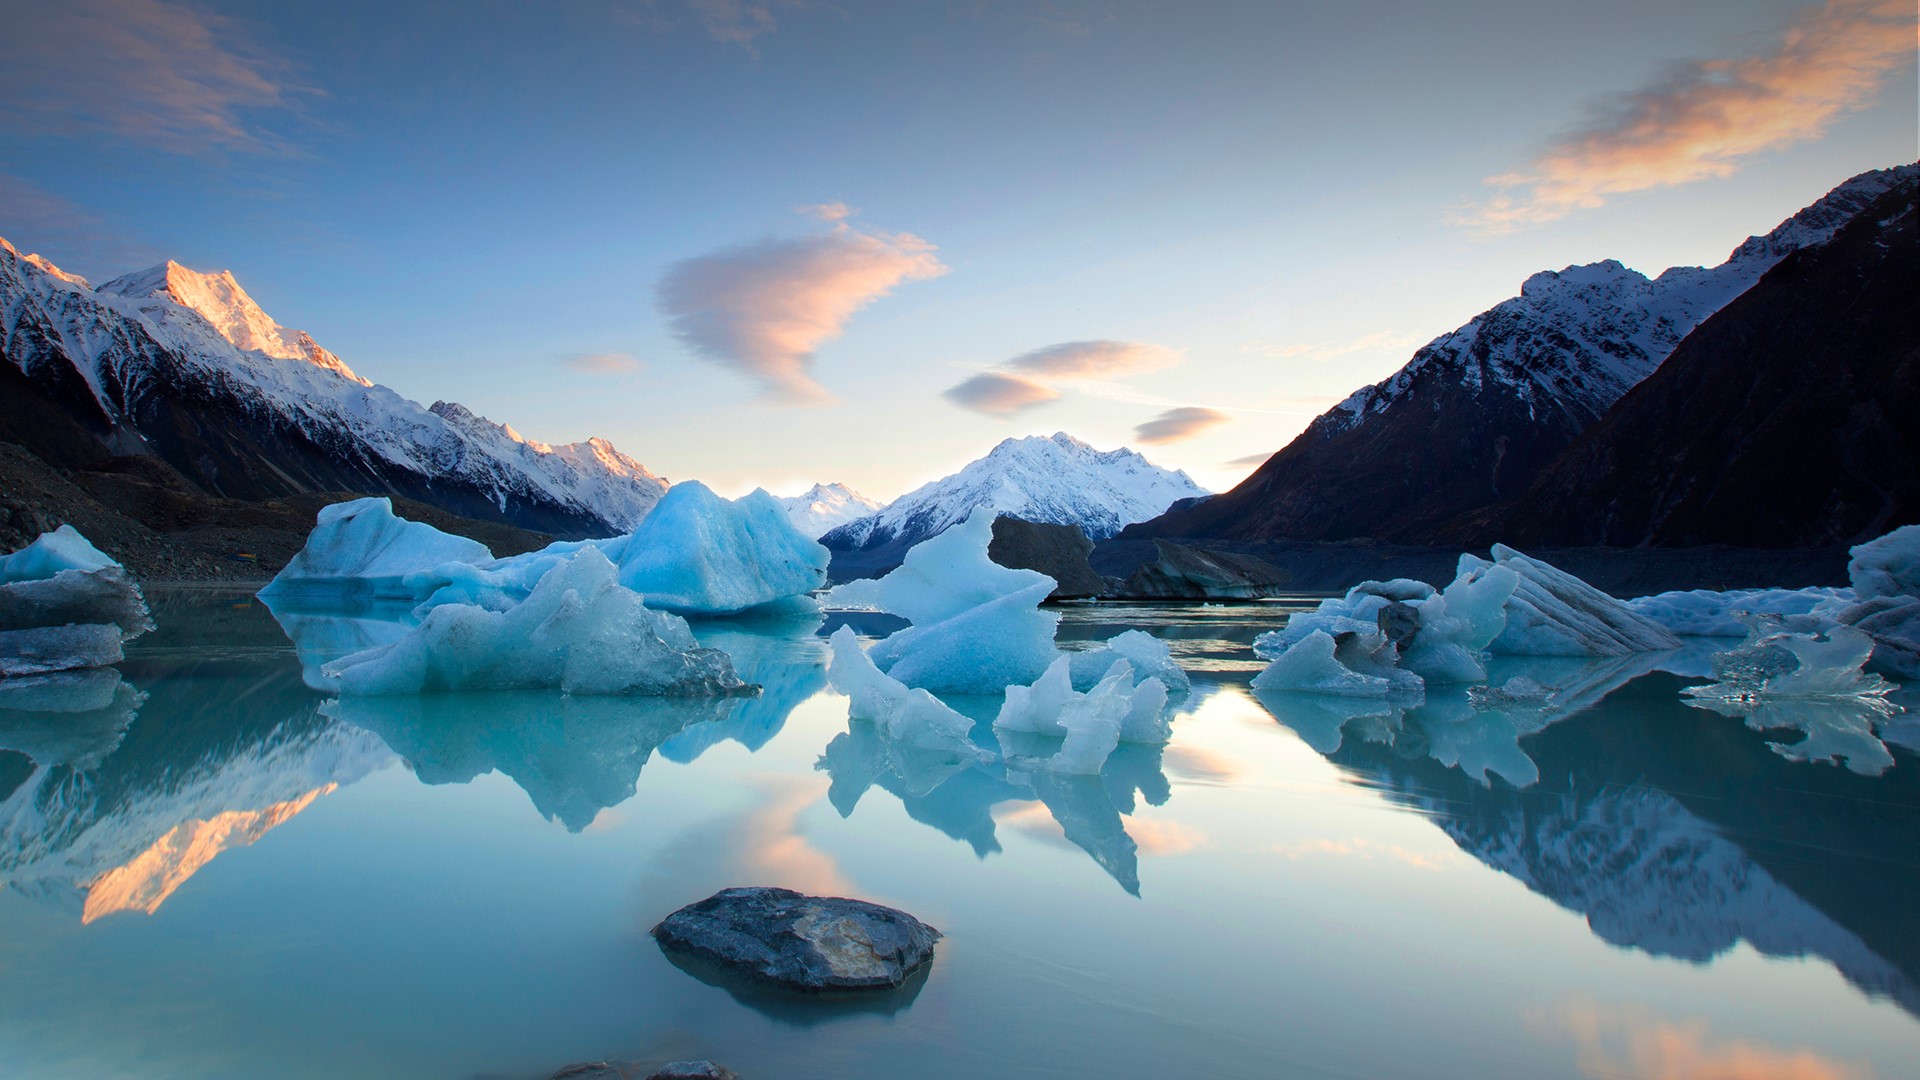 Nature Landscape Ice Snow Snowy Mountain Clouds Sky Reflection Mount Cook Iceberg New Zealand 1920x1080